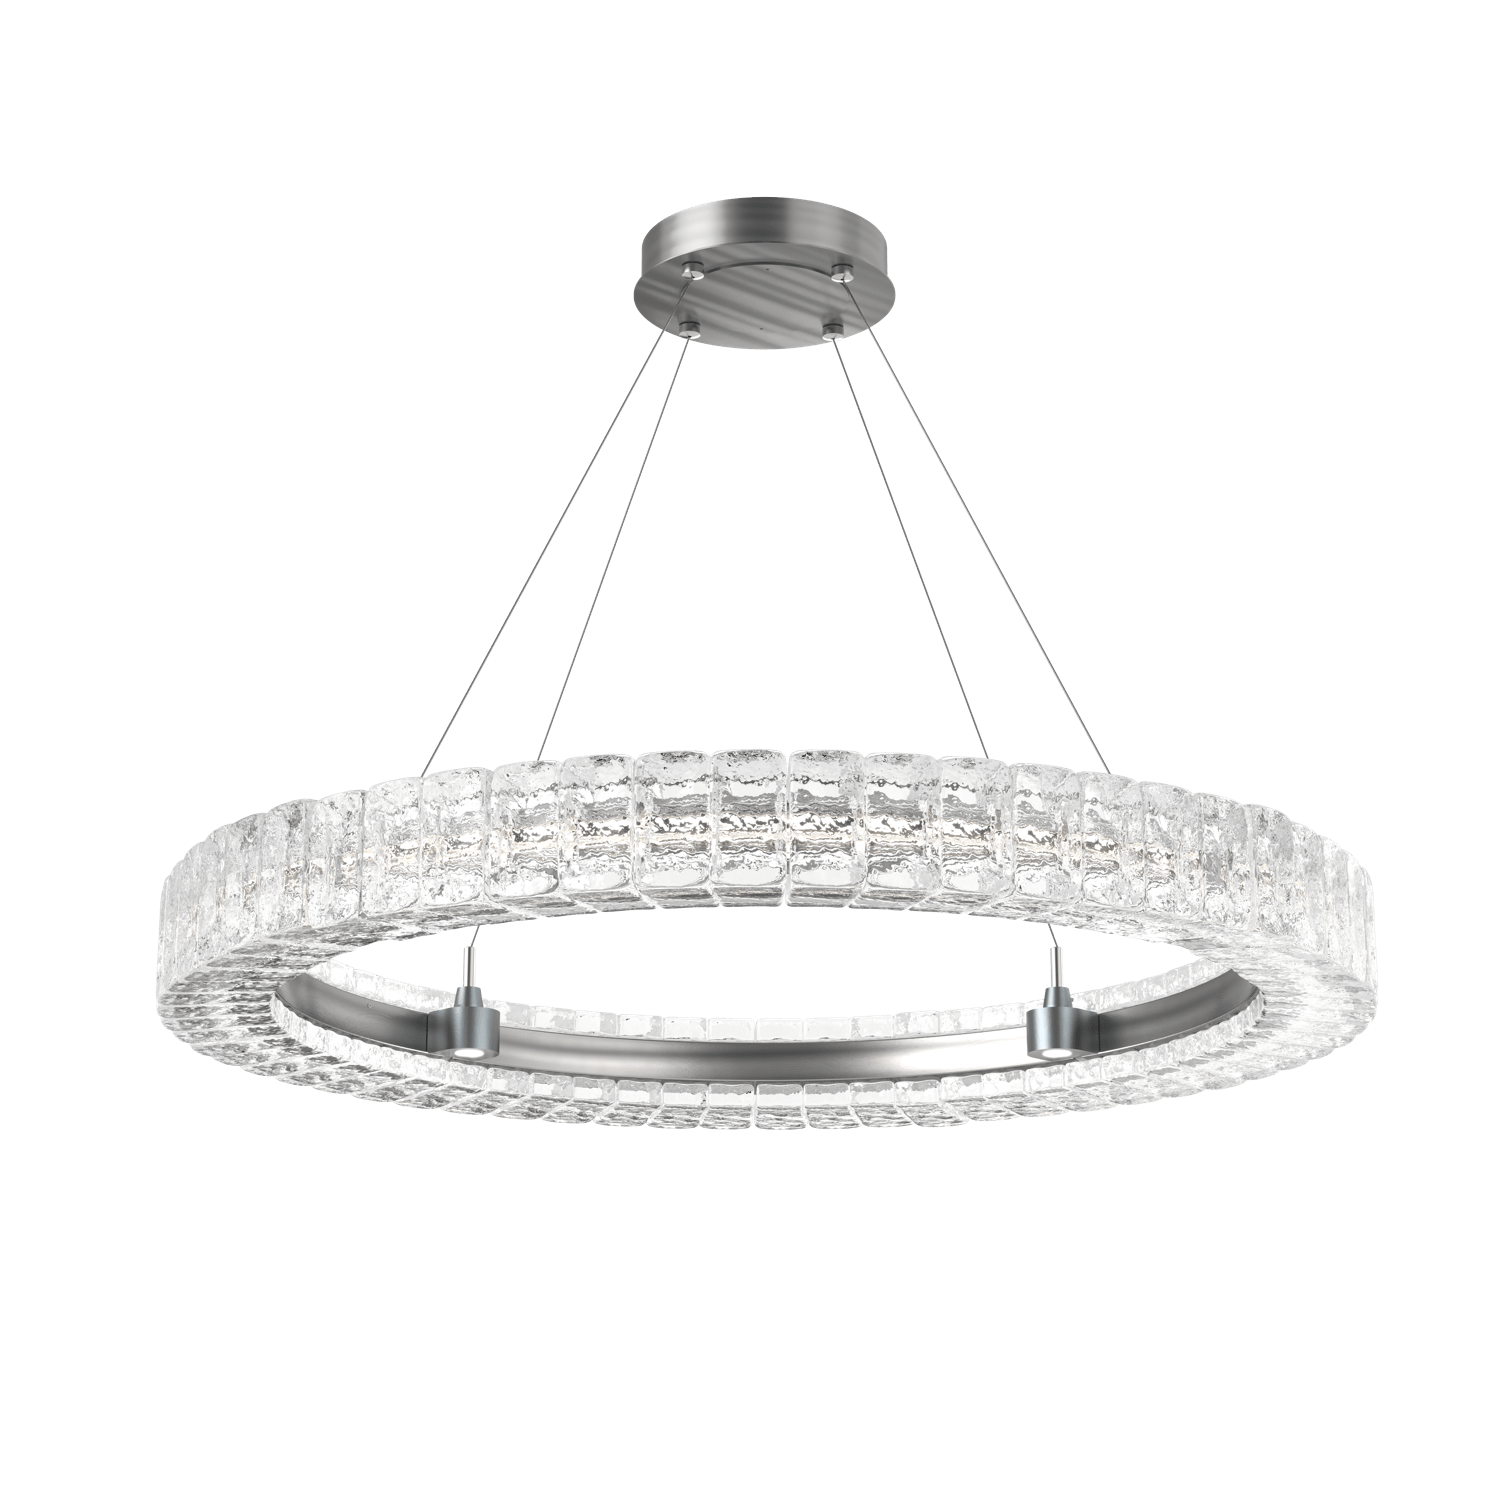 CHB0080-36-SN-Hammerton-Studio-Asscher-36-inch-ring-chandelier-with-satin-nickel-finish-and-clear-cast-glass-shades-and-LED-lamping